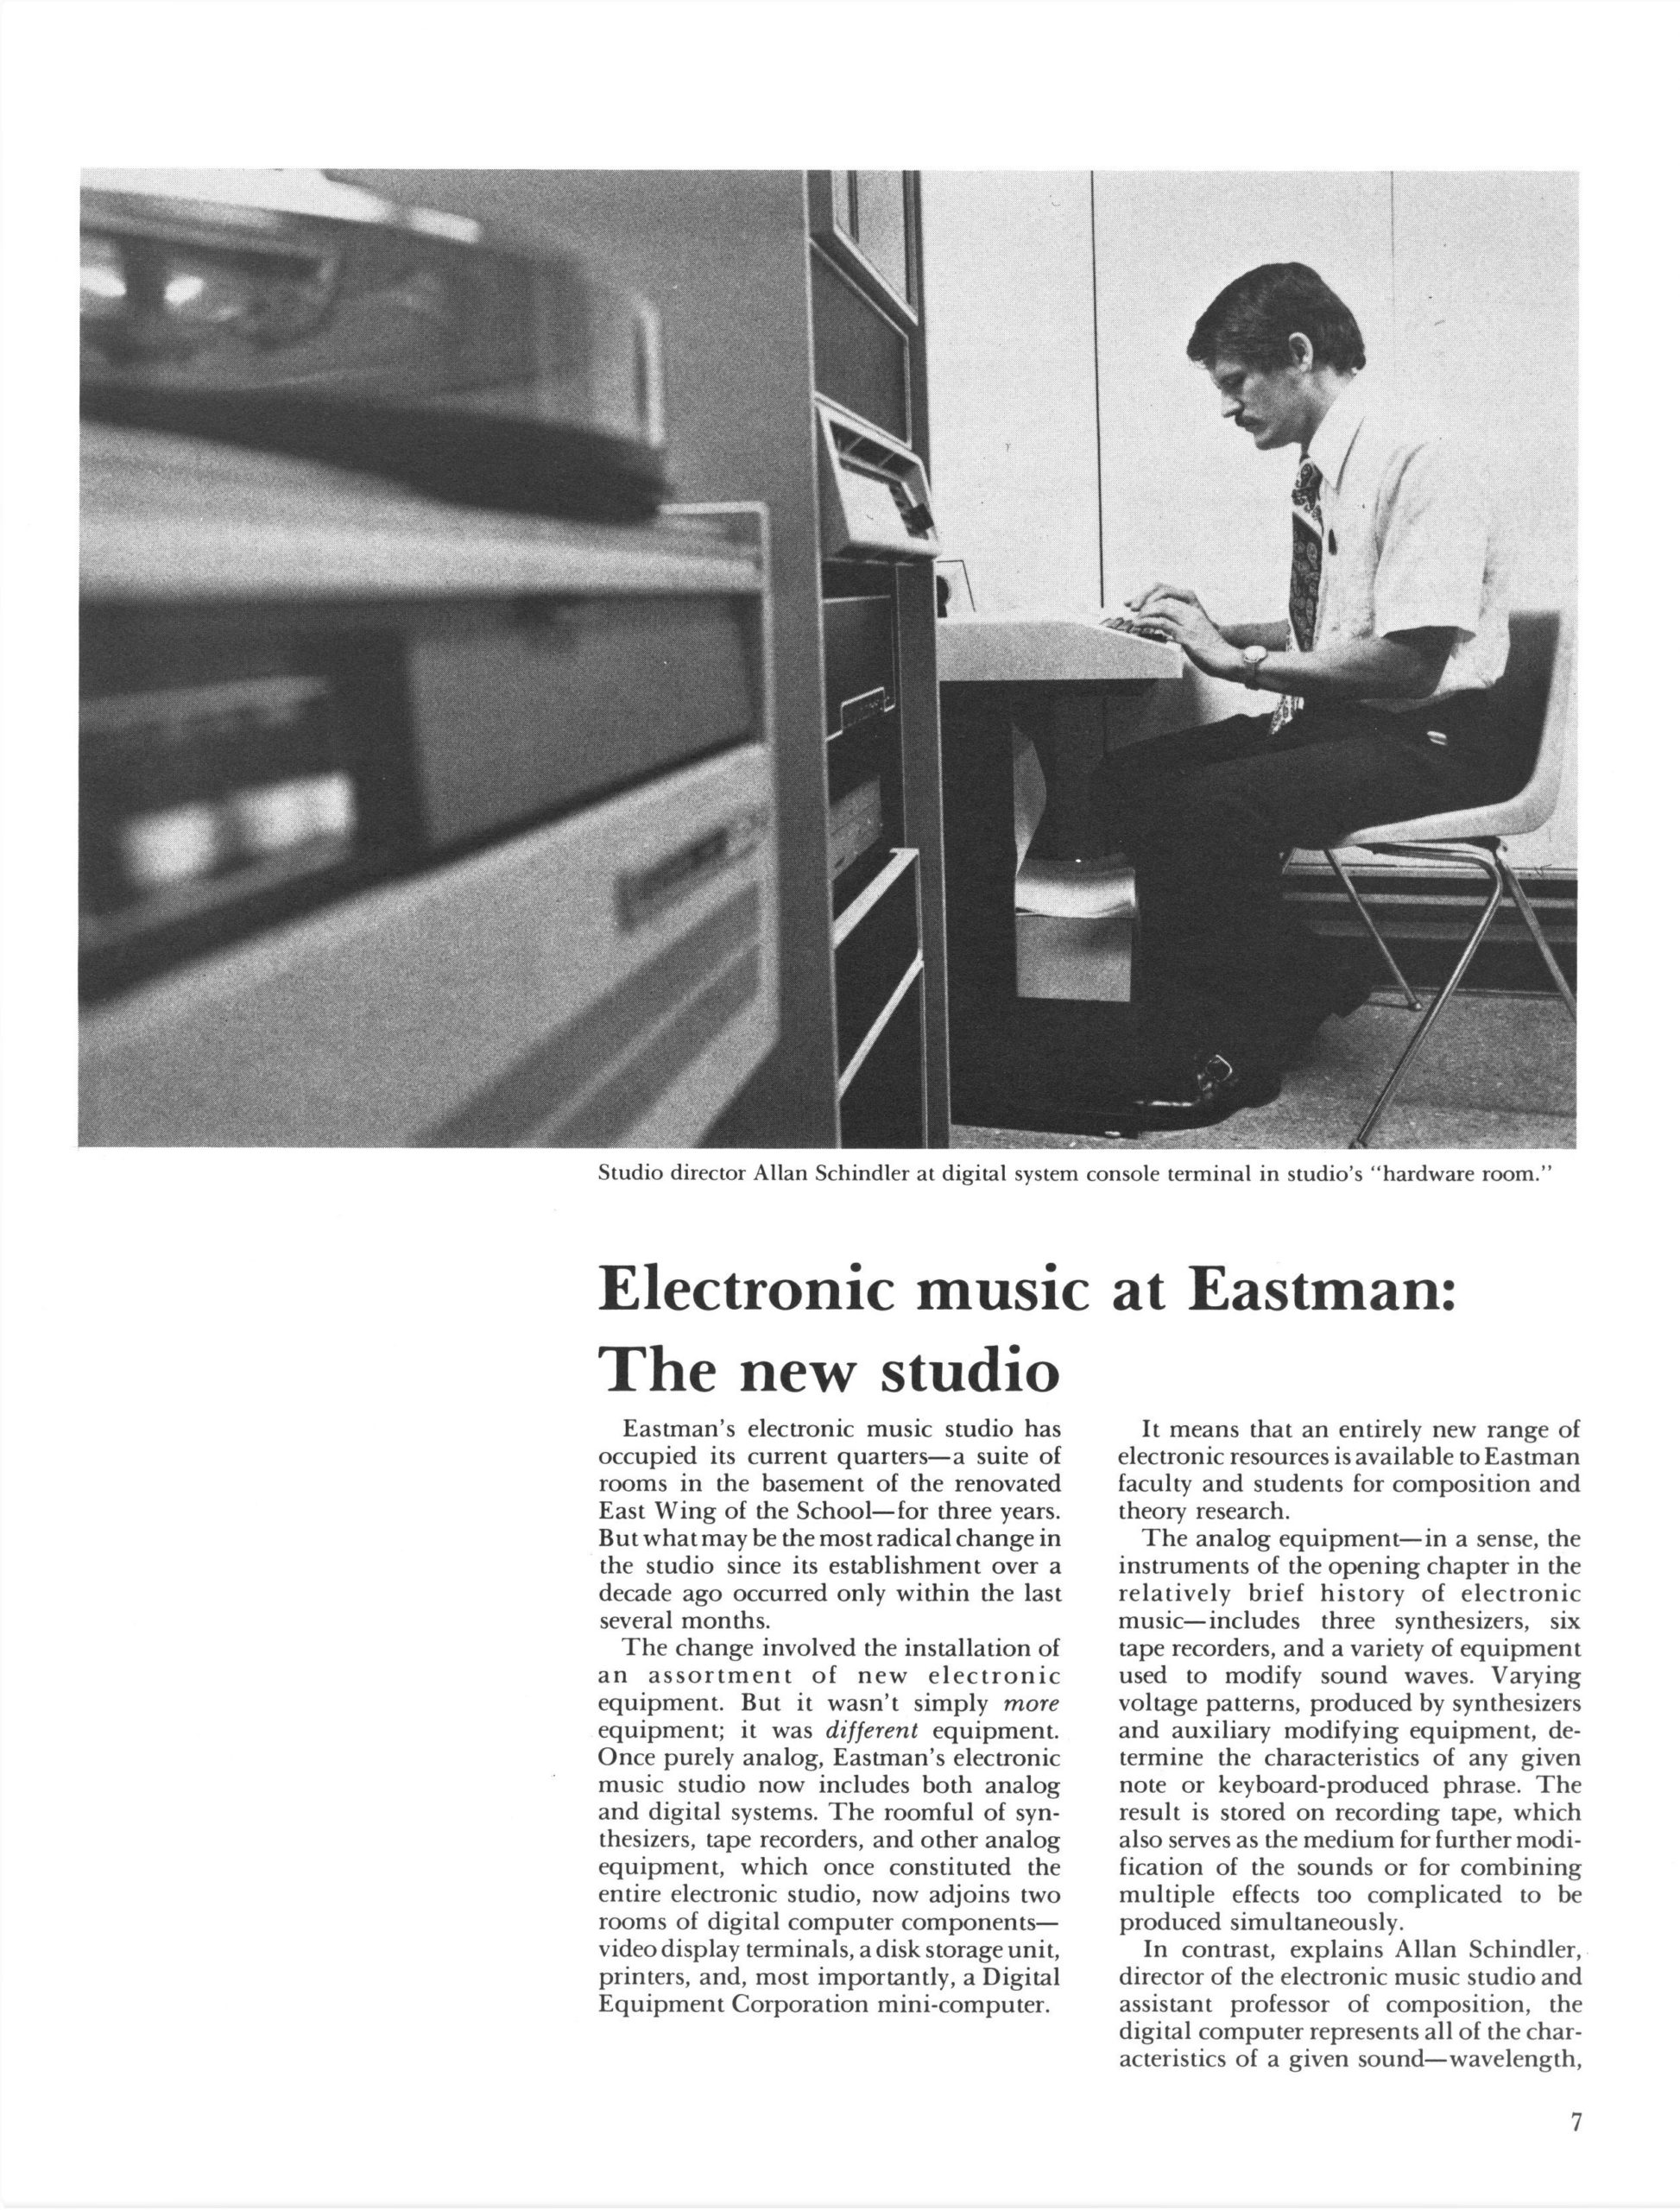 Electronic music at Eastman, The new studio article, page 1